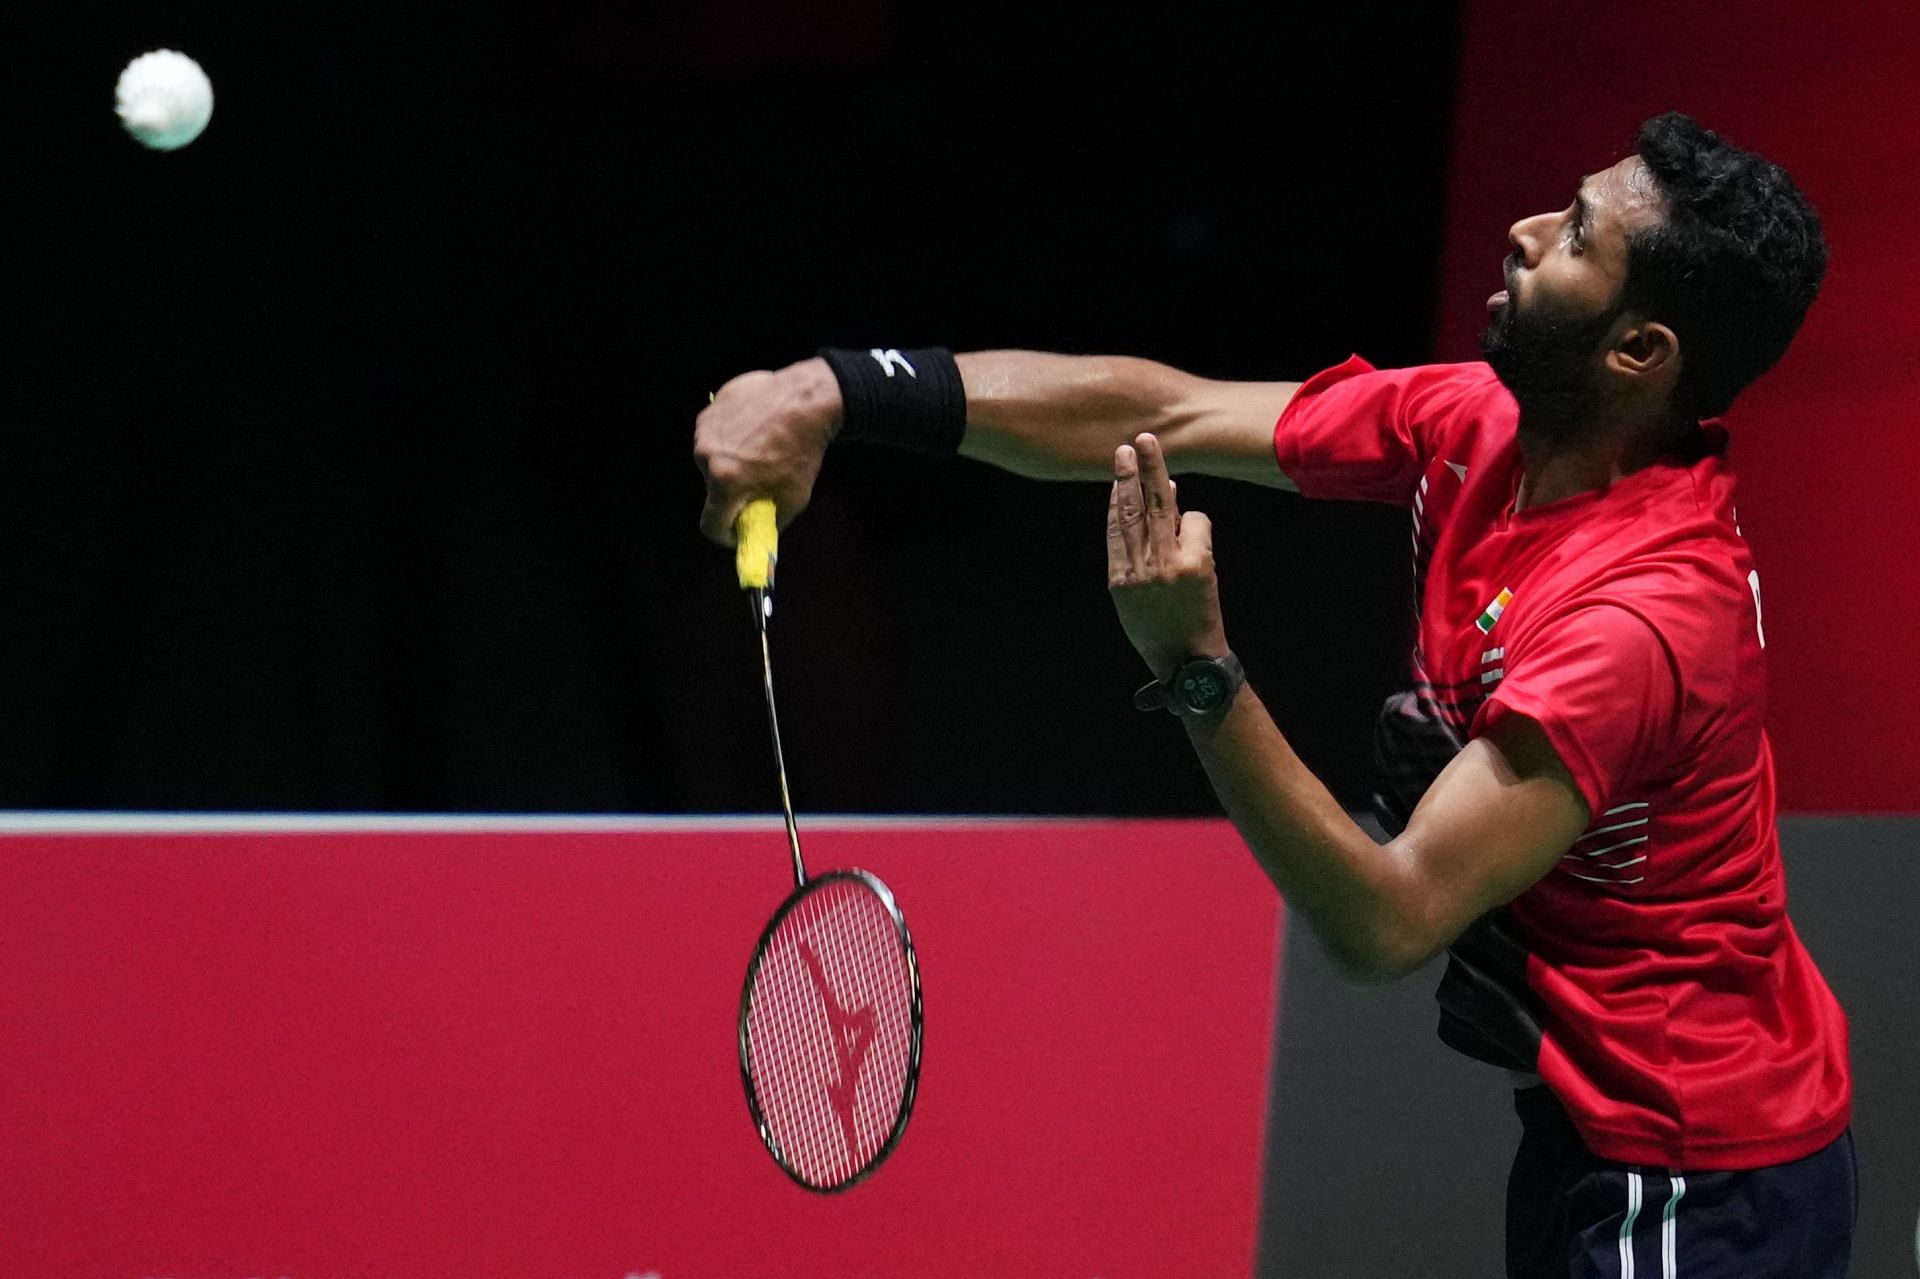 BWF World Championships 2023 HS Prannoy vs Viktor Axelsen, head-to-head, prediction, where to watch and live streaming details